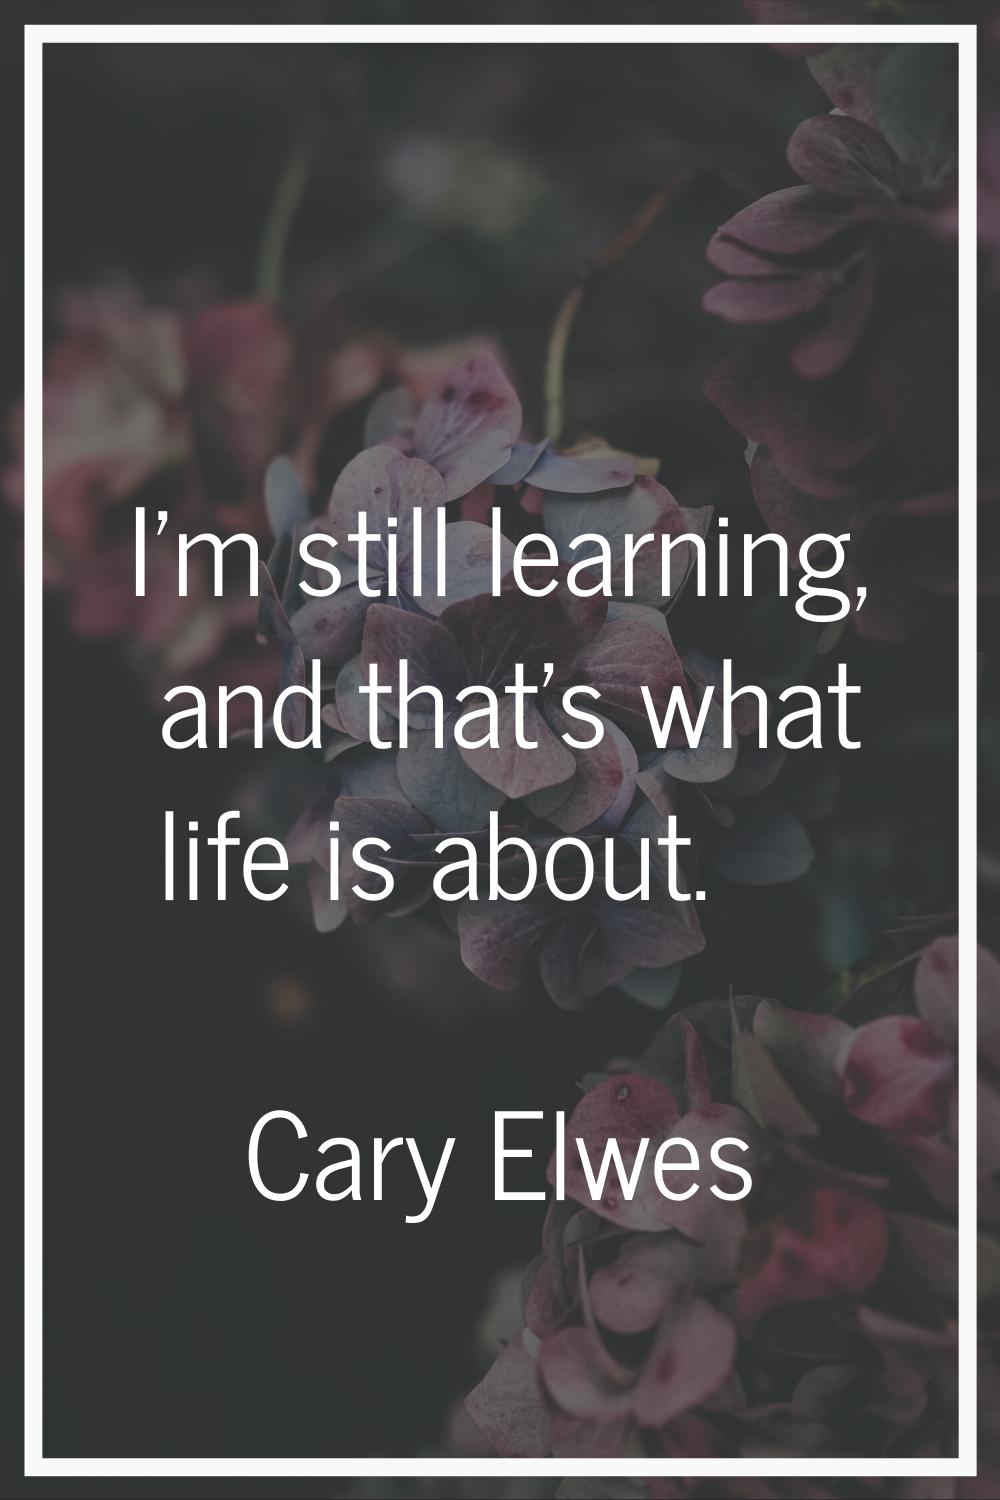 I'm still learning, and that's what life is about.